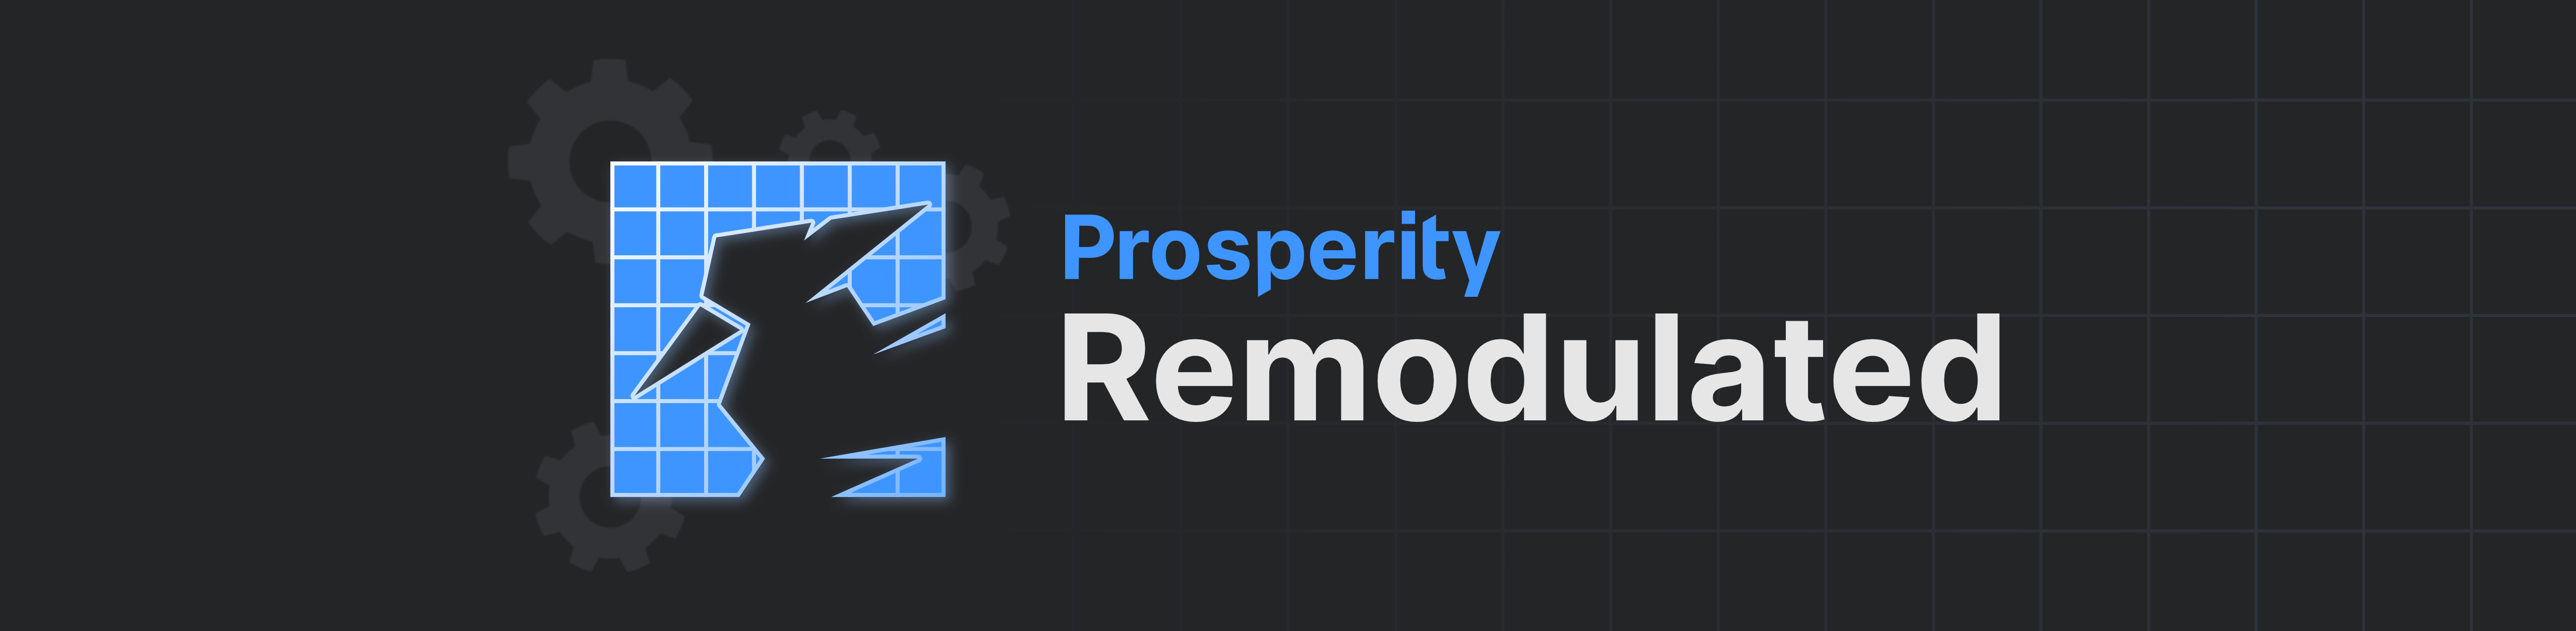 Prosperity Remodulated